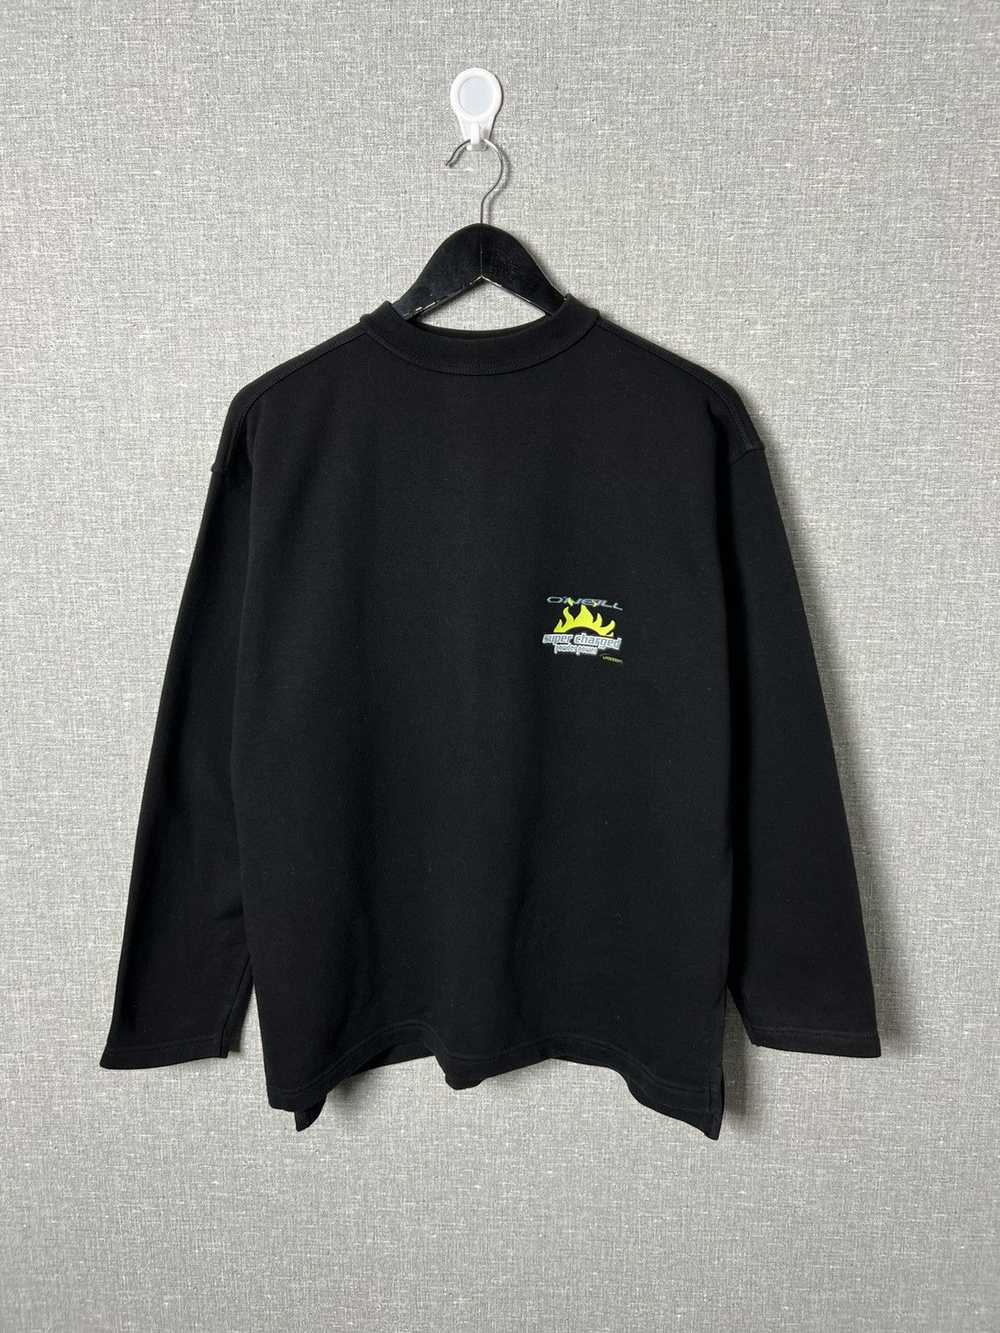 Oneill × Surf Style × Vintage Very Rare Vintage O… - image 4